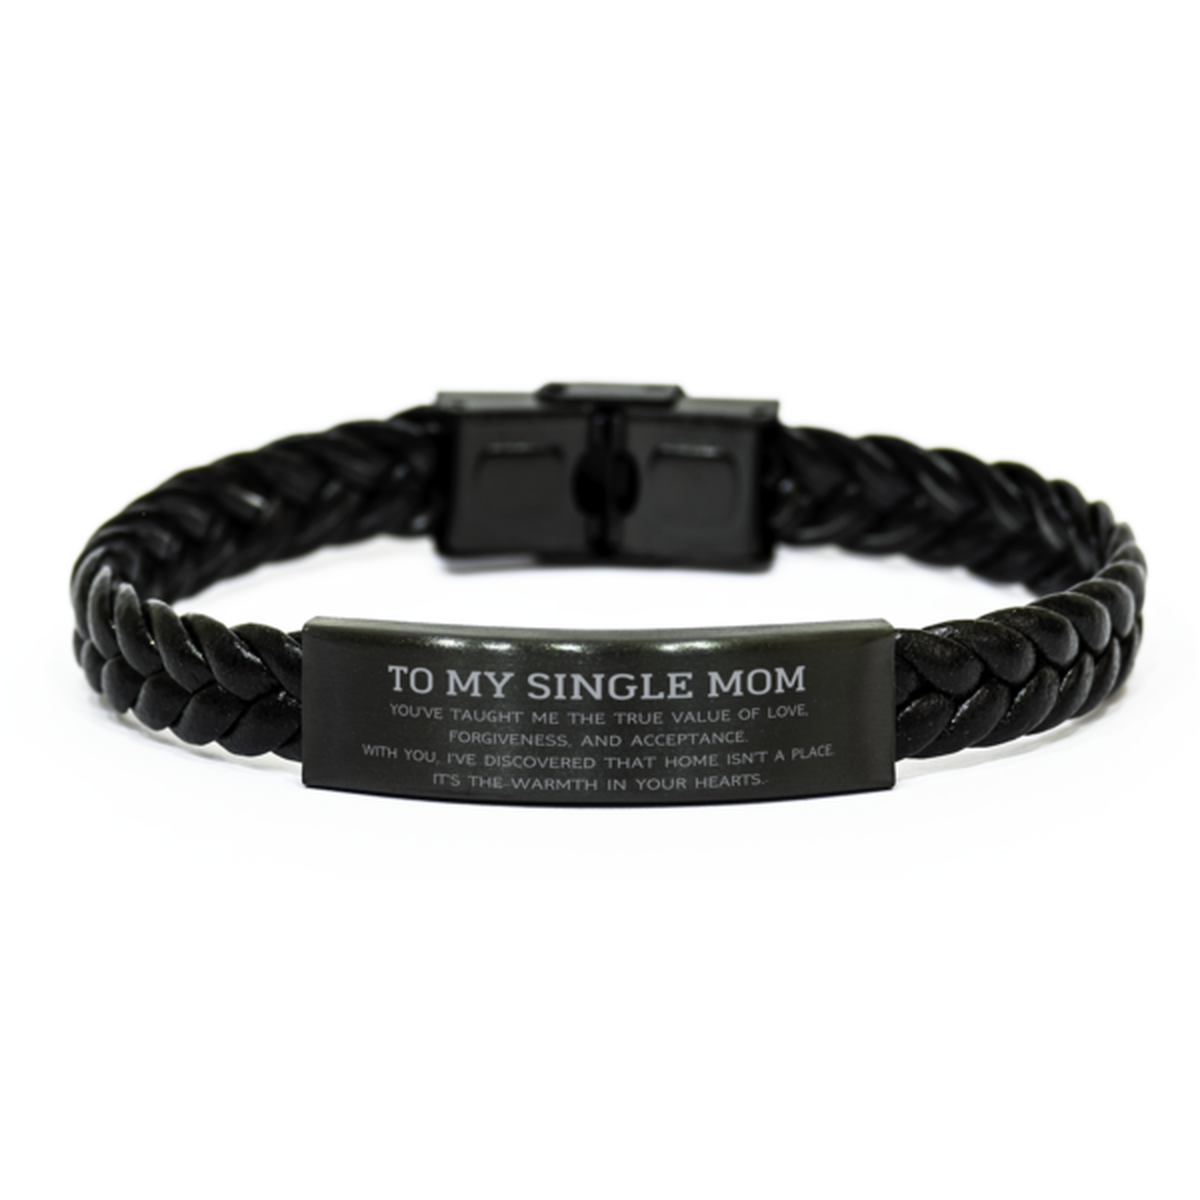 To My Single Mom Gifts, You've taught me the true value of love, Thank You Gifts For Single Mom, Birthday Braided Leather Bracelet For Single Mom